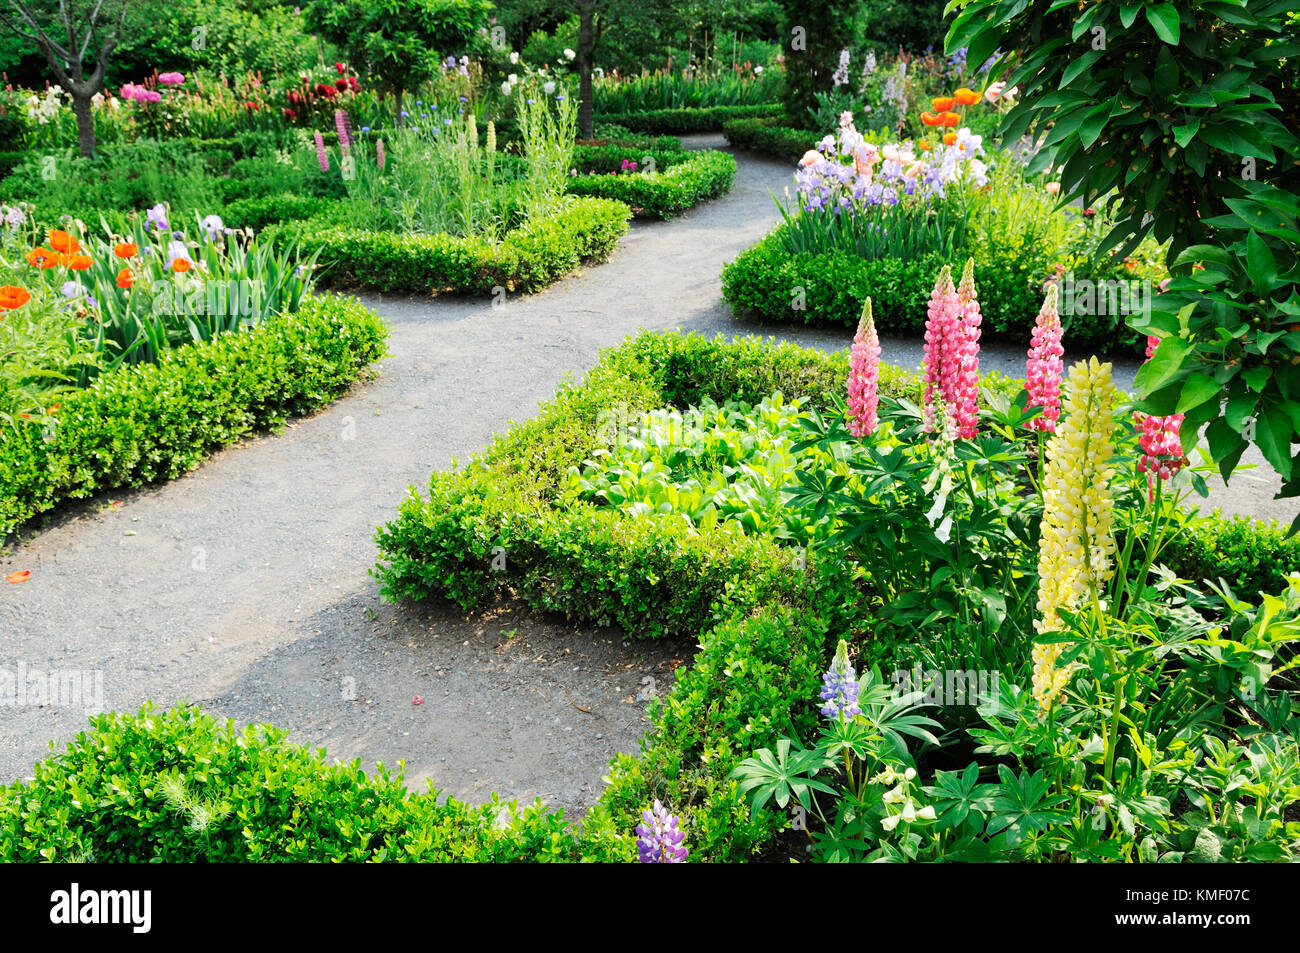 Classic landscape design with crushed stone garden paths, low hedge borders, lupine shoots, iris flowers, oriental poppies and other colorful plants Stock Photo